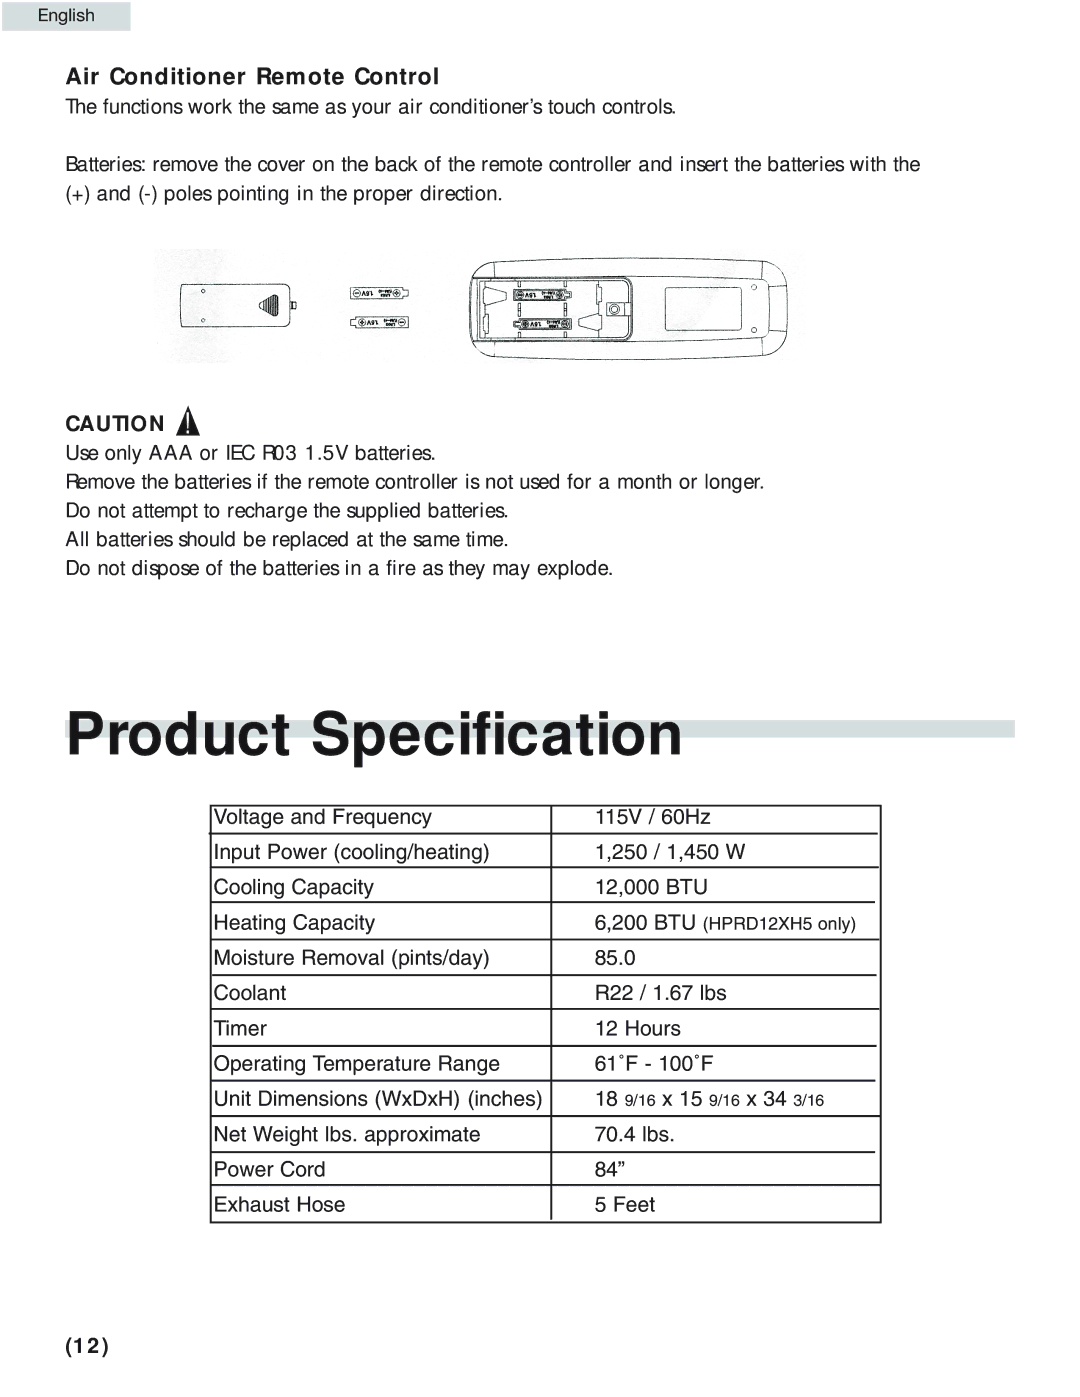 Haier HPRD12HC5 manual Product Specification, Air Conditioner Remote Control 